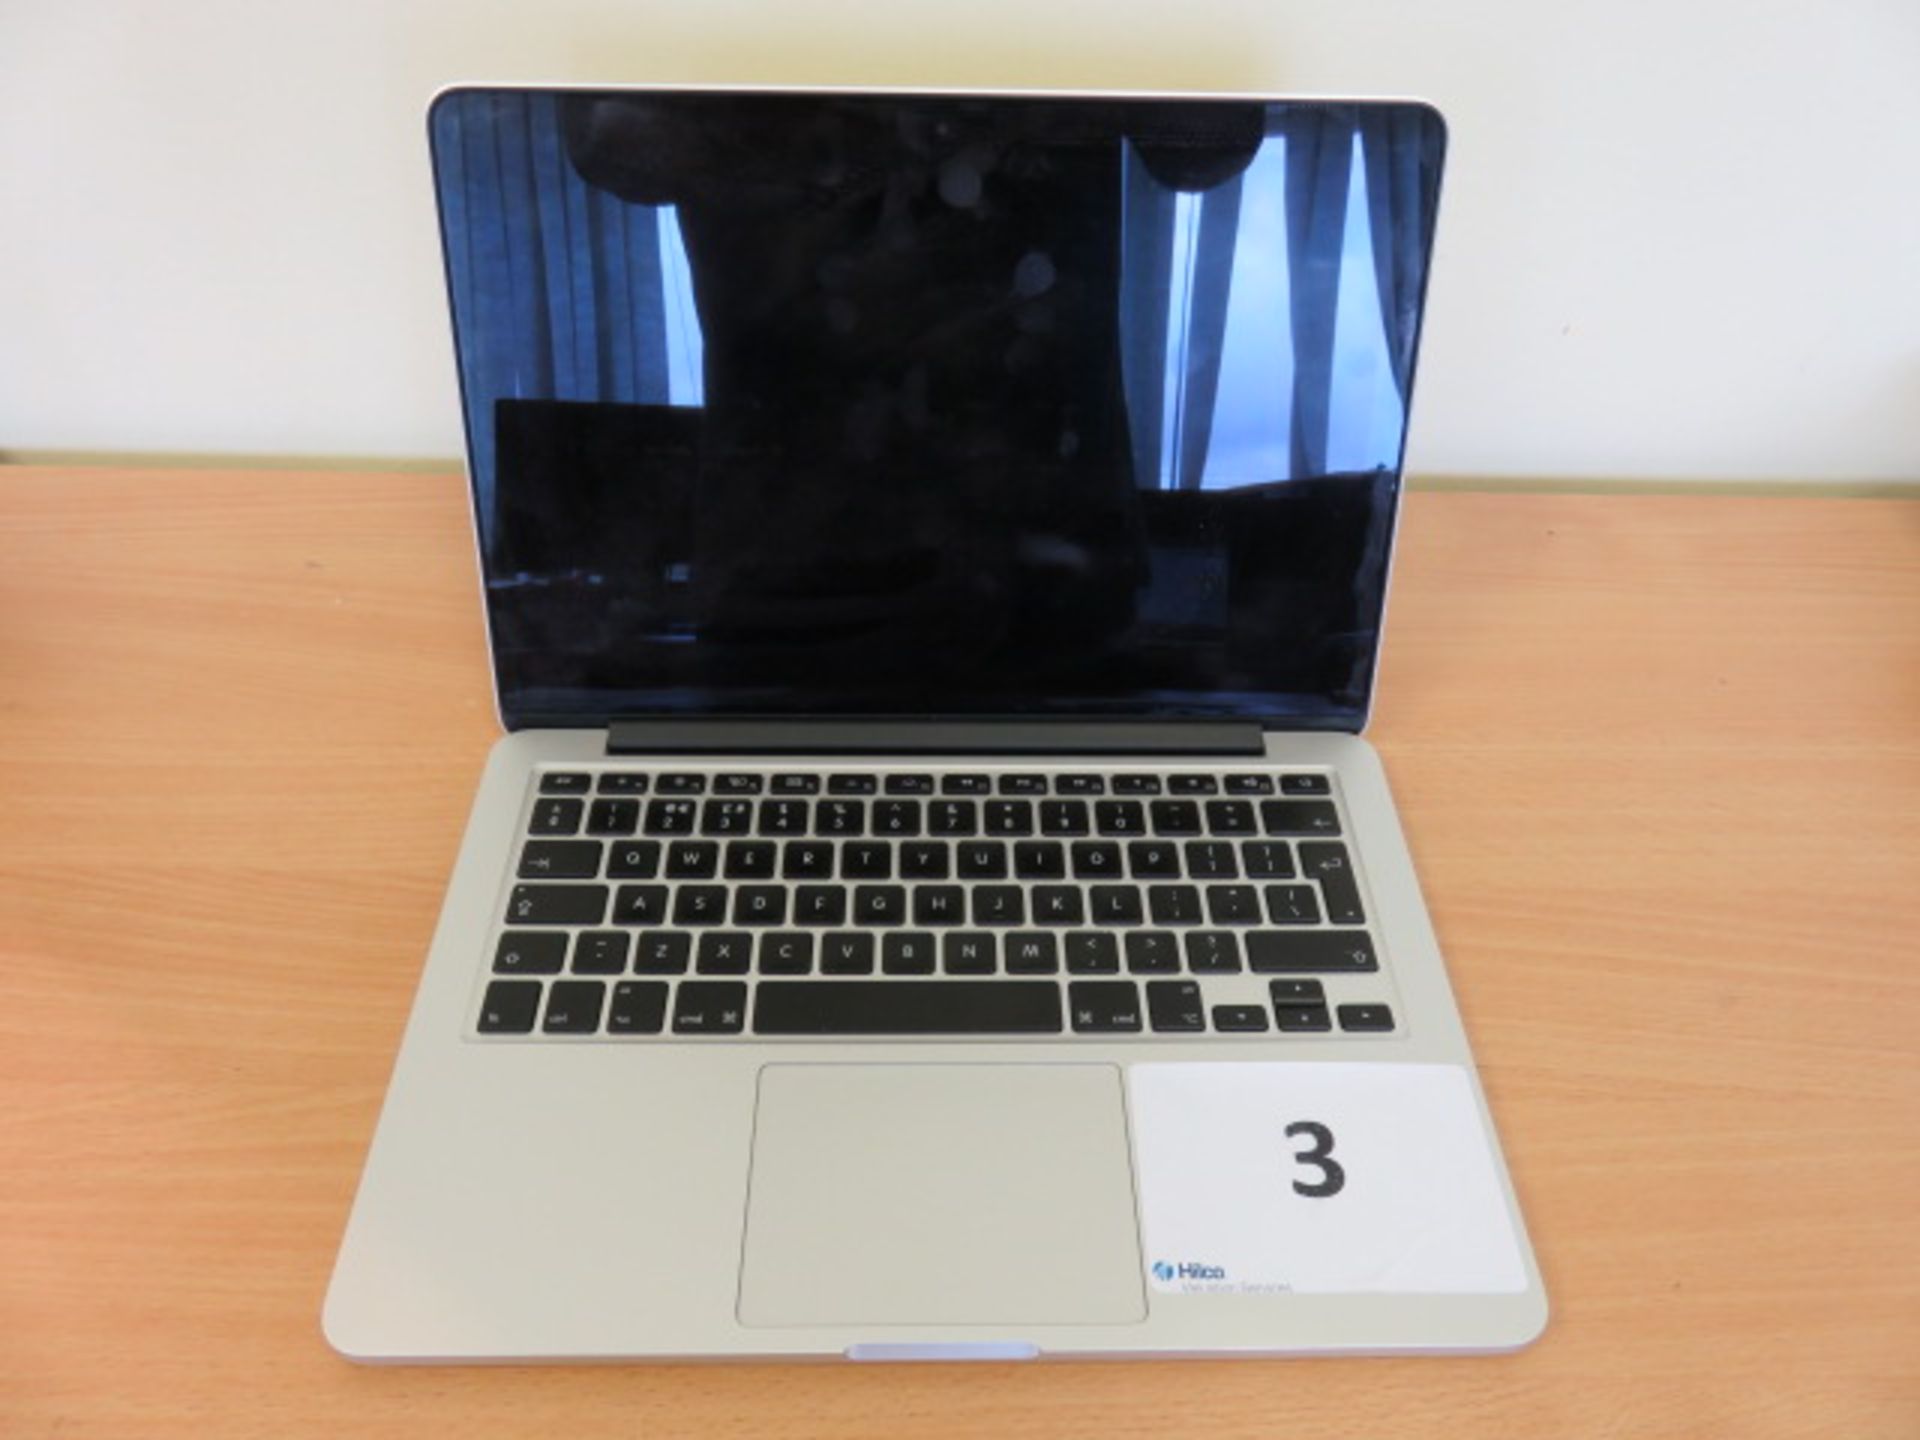 Apple Macbook Pro A1502 13in Core i5 Laptop (2015) Serial No. C02SMRCDFVH3 (Asset No. 204)